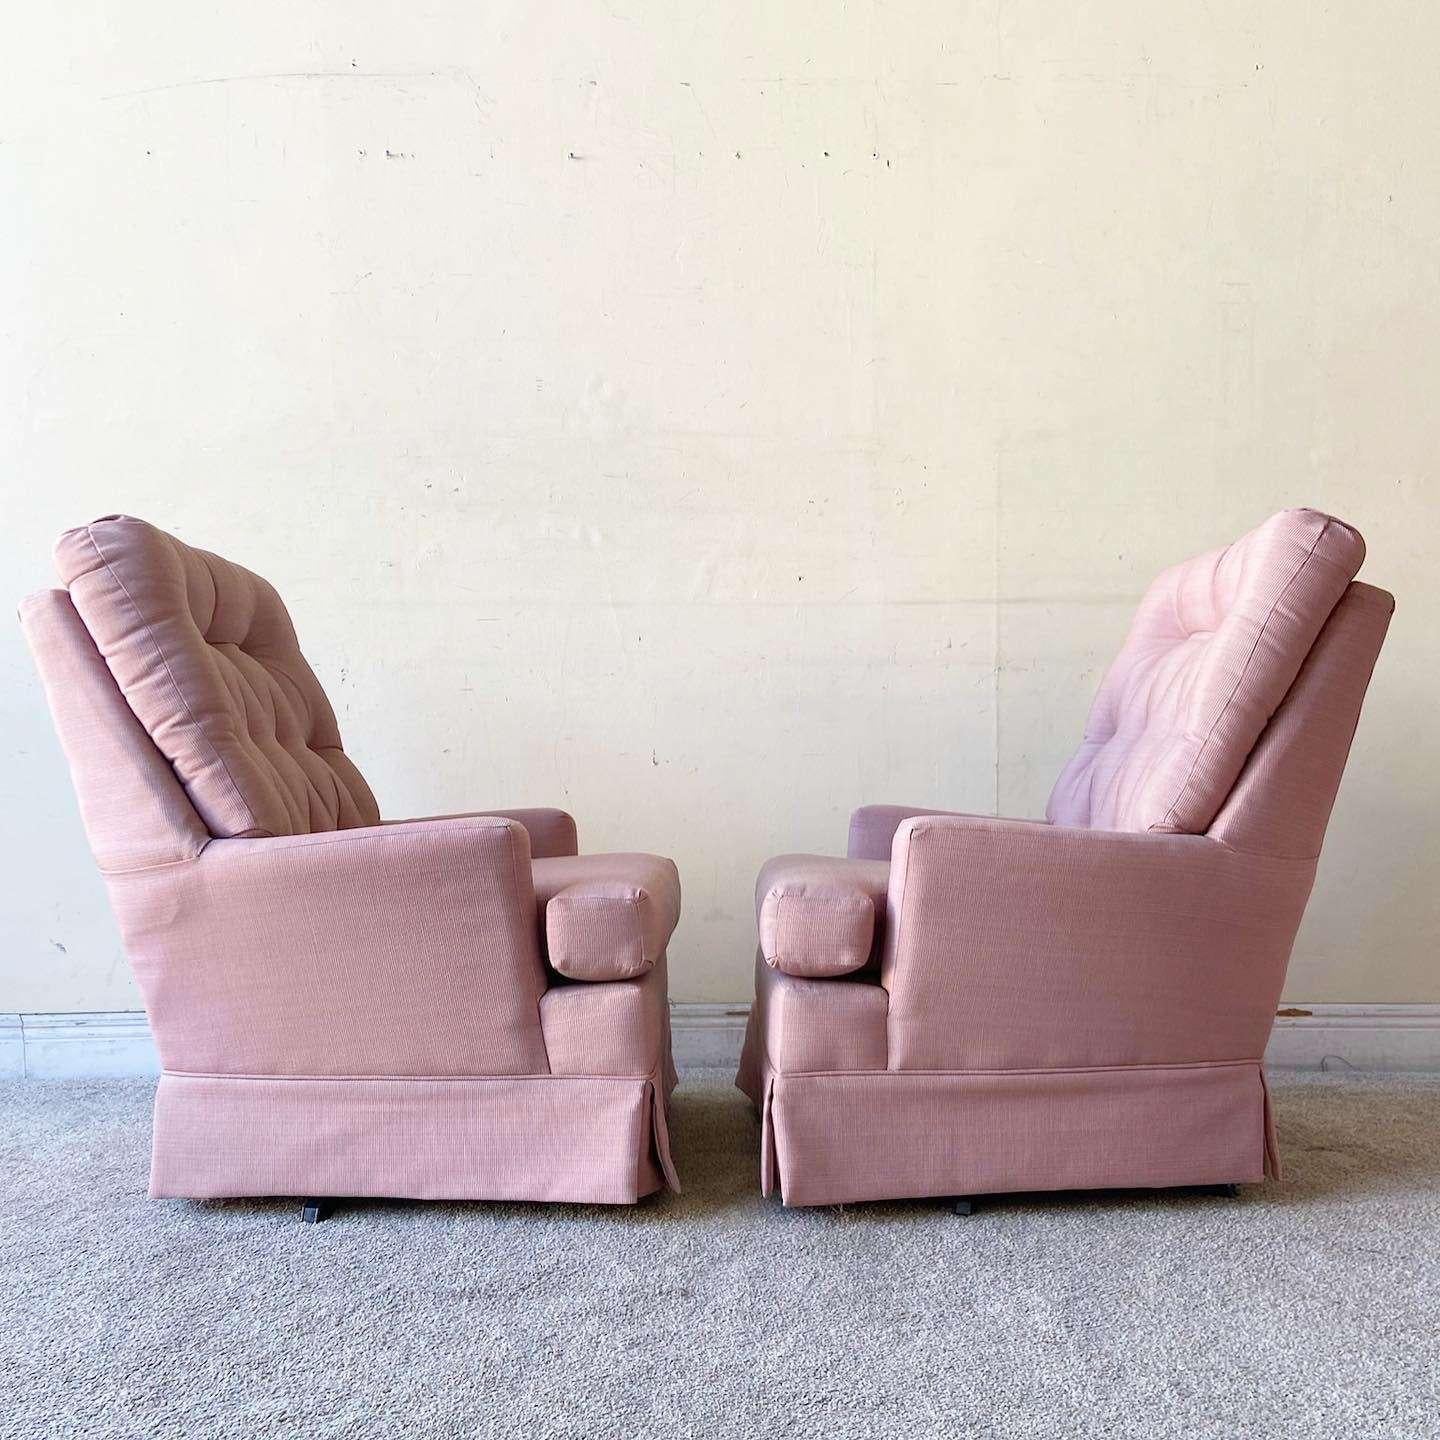 American Mid Century Modern Pink Tufted Swivel Chairs For Sale